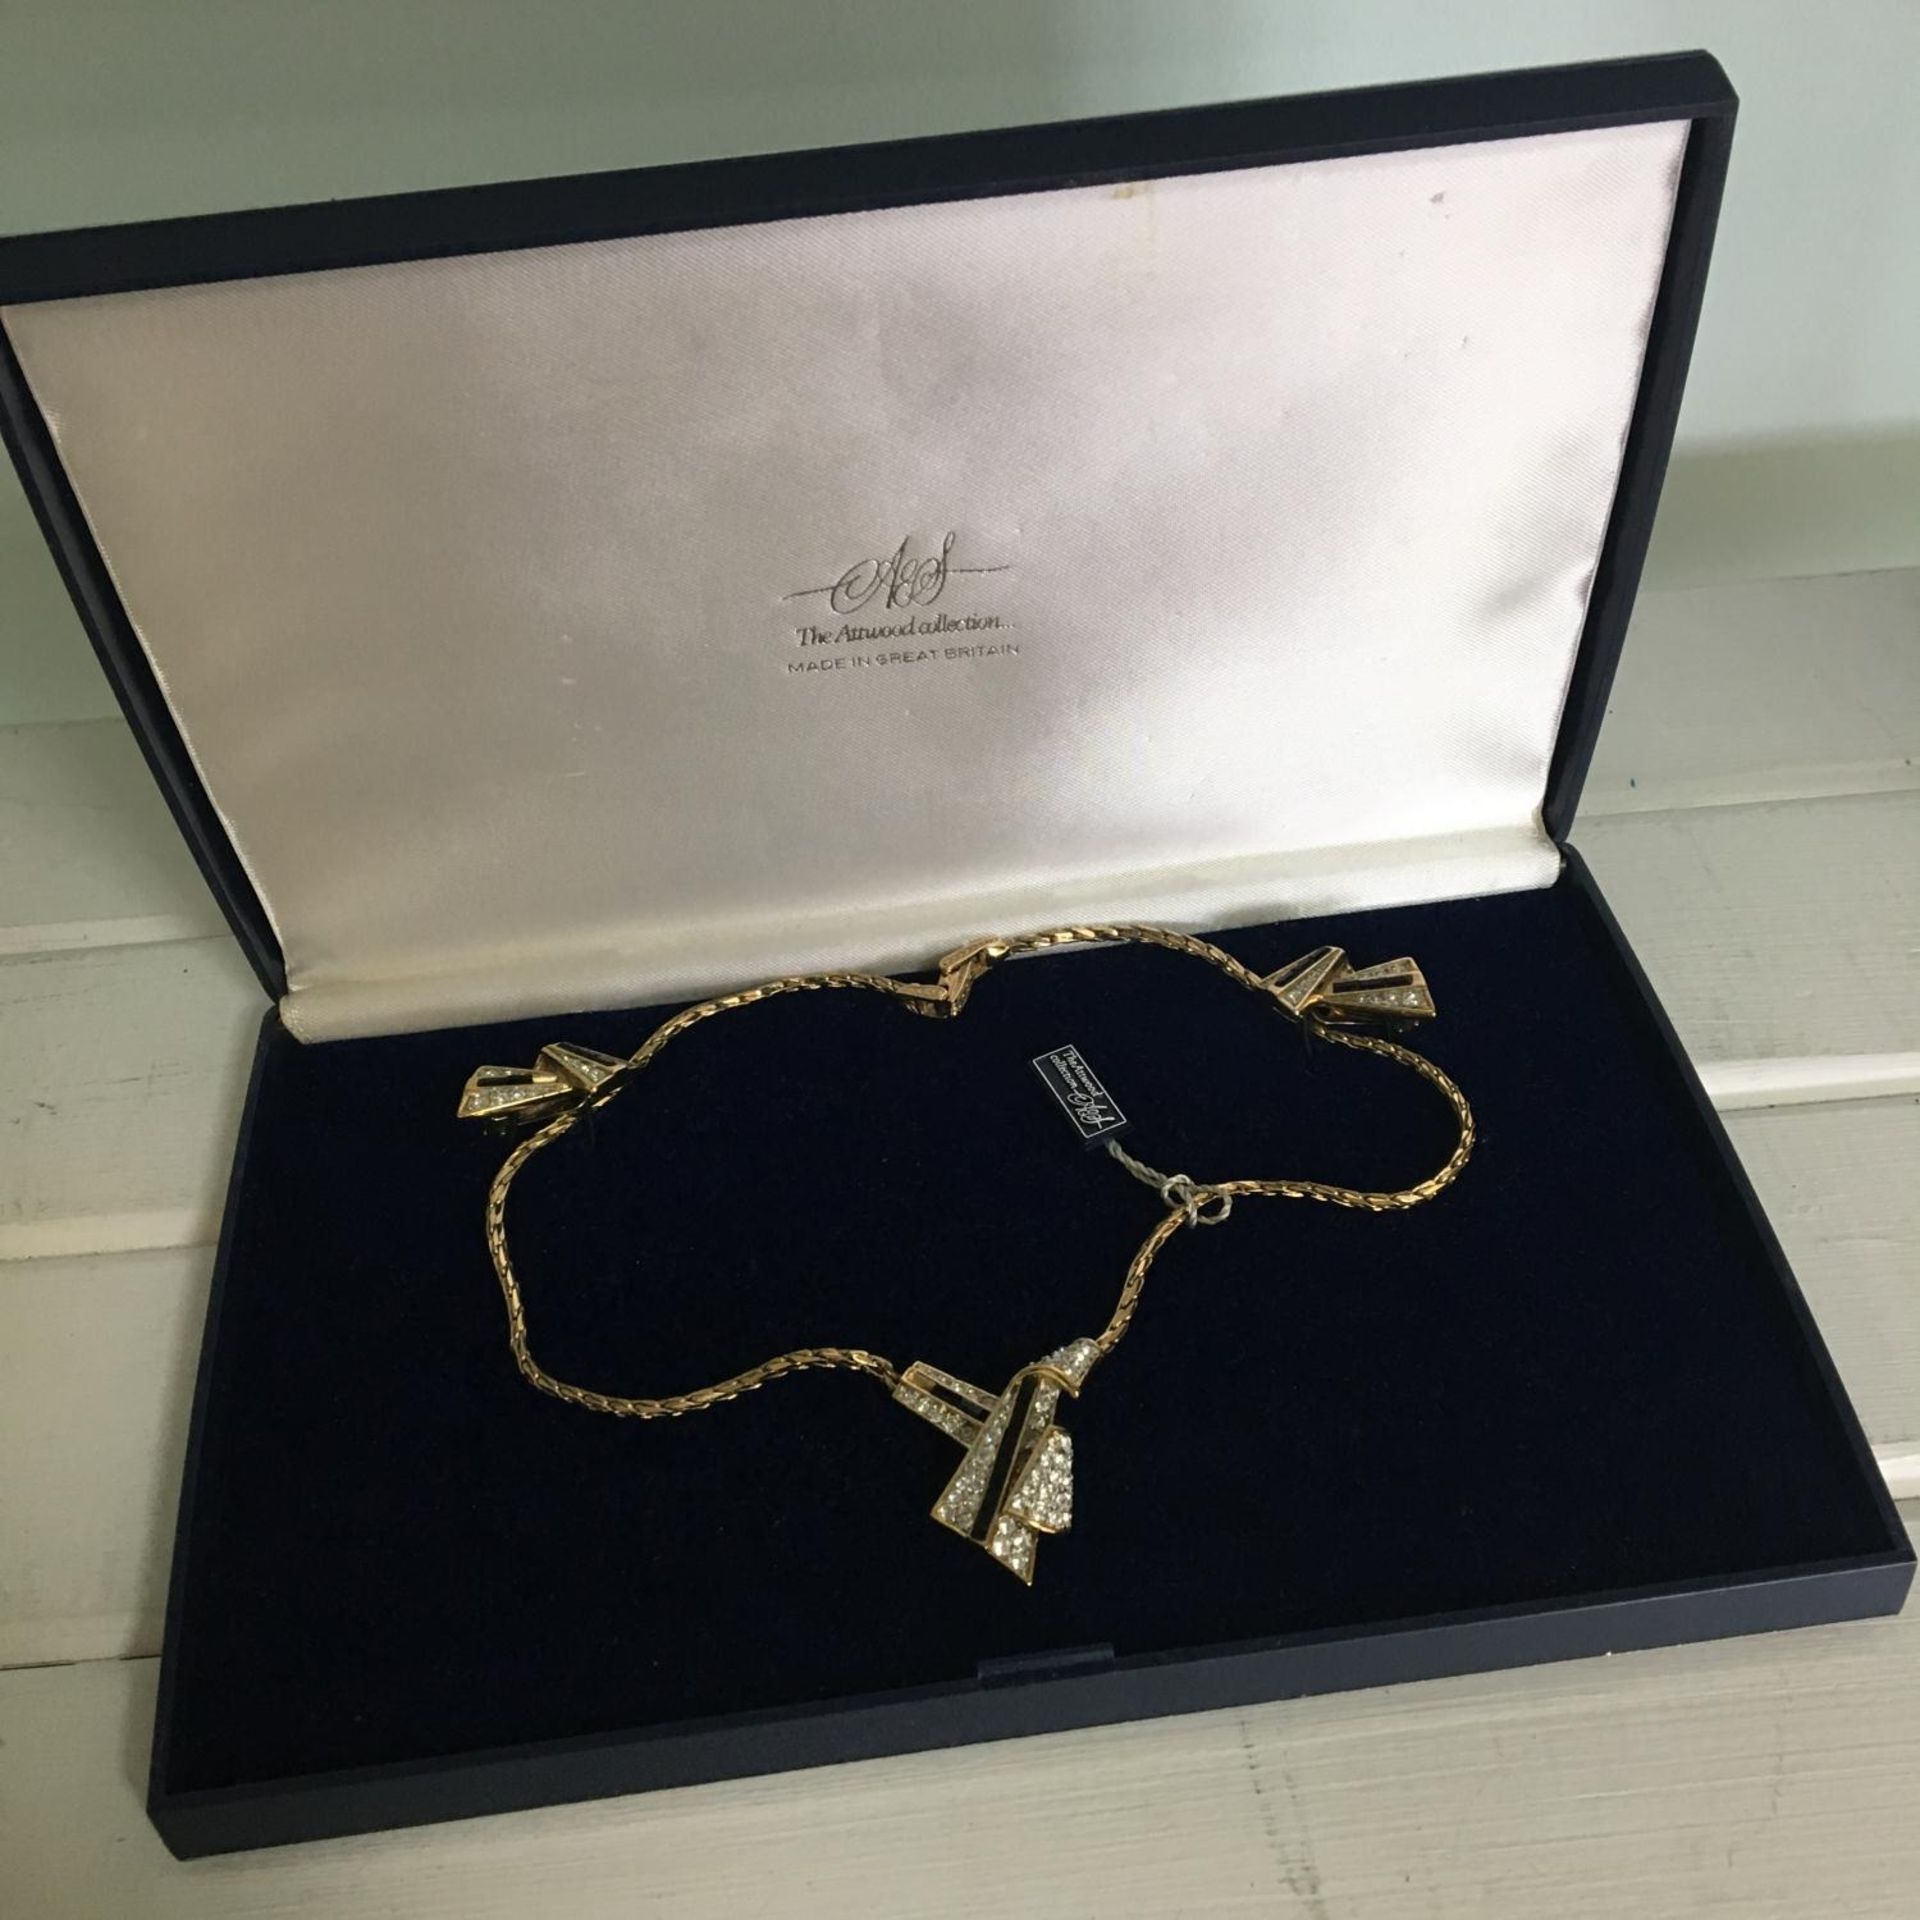 The Attwood Collection - jewellery set in original box with tag attached. From the high quality